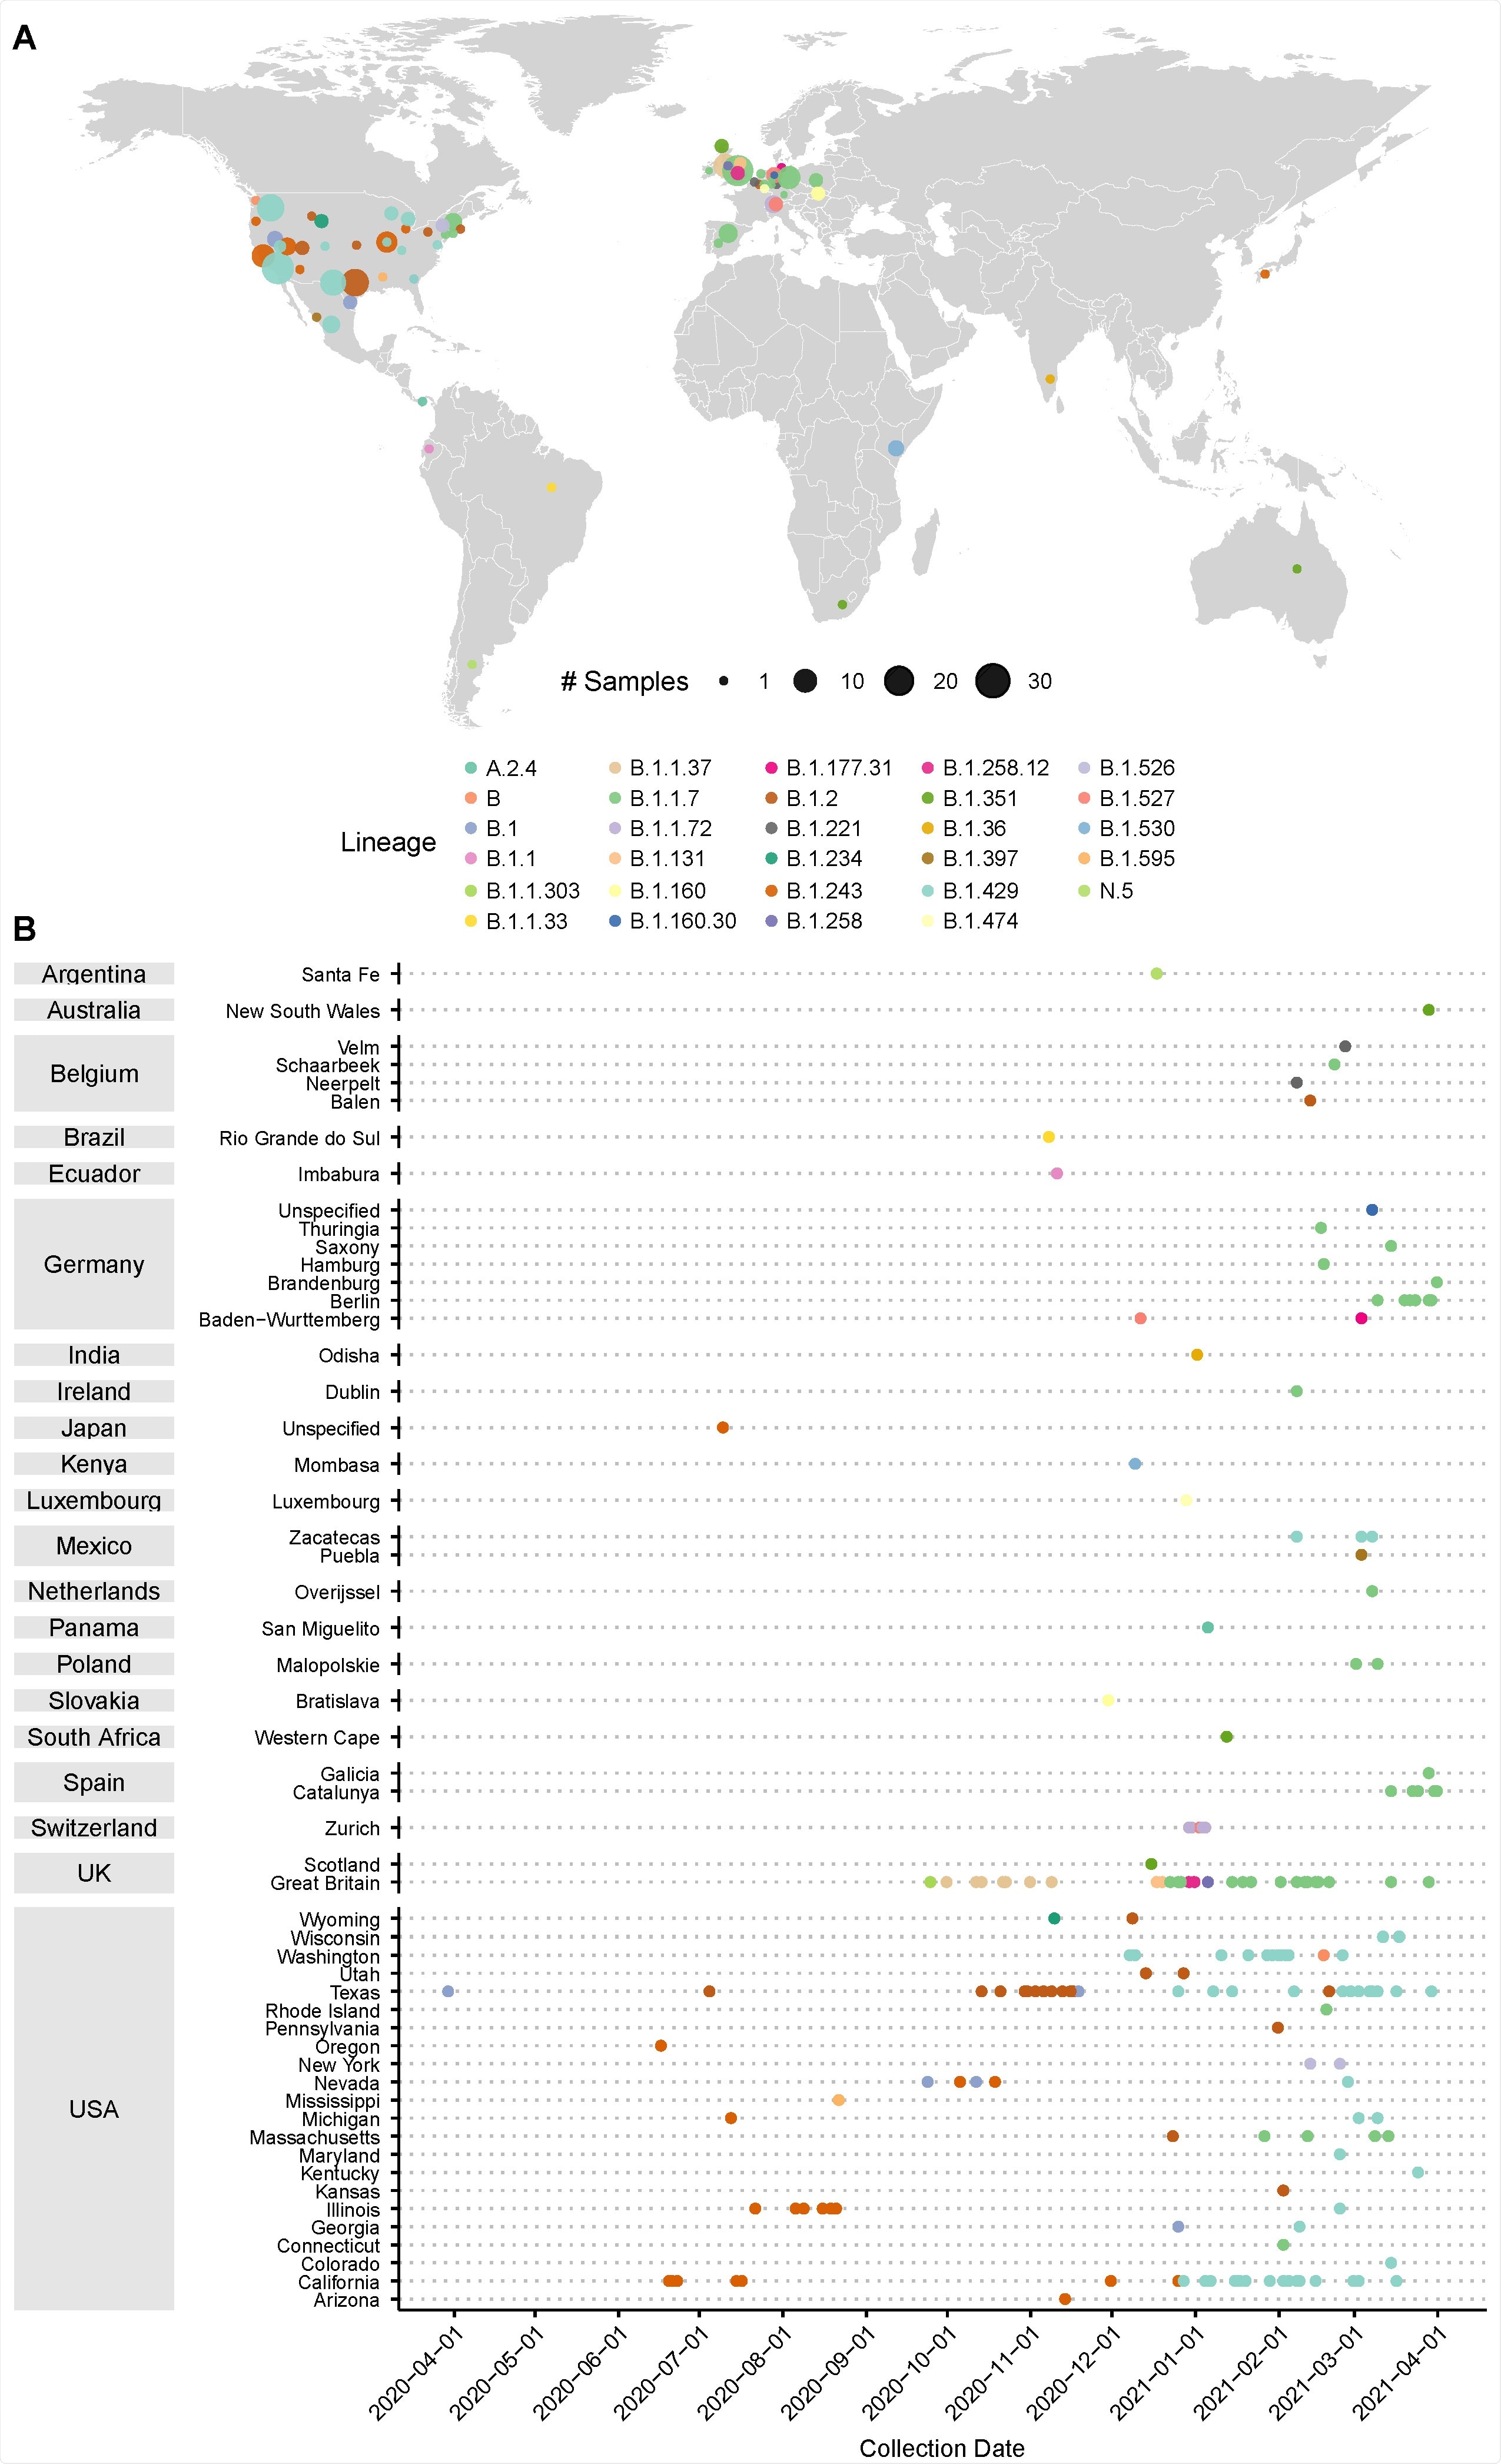 Prevalence of D399N mutations in deposited GISAID consensus sequences. A) Distribution of deposited GISAID genomes with the D399N mutation across the globe. Each dot represents sequences in a GISAID-defined subregion, with area of the dot proportional to the number of sequences. Dots are colored by PANGO lineage. B) Distribution of deposited GISAID genomes with the D399N mutation over time. Countries and subregions are indicated on the left. Each dot represents a unique deposited sequence, colored by PANGO lineage.